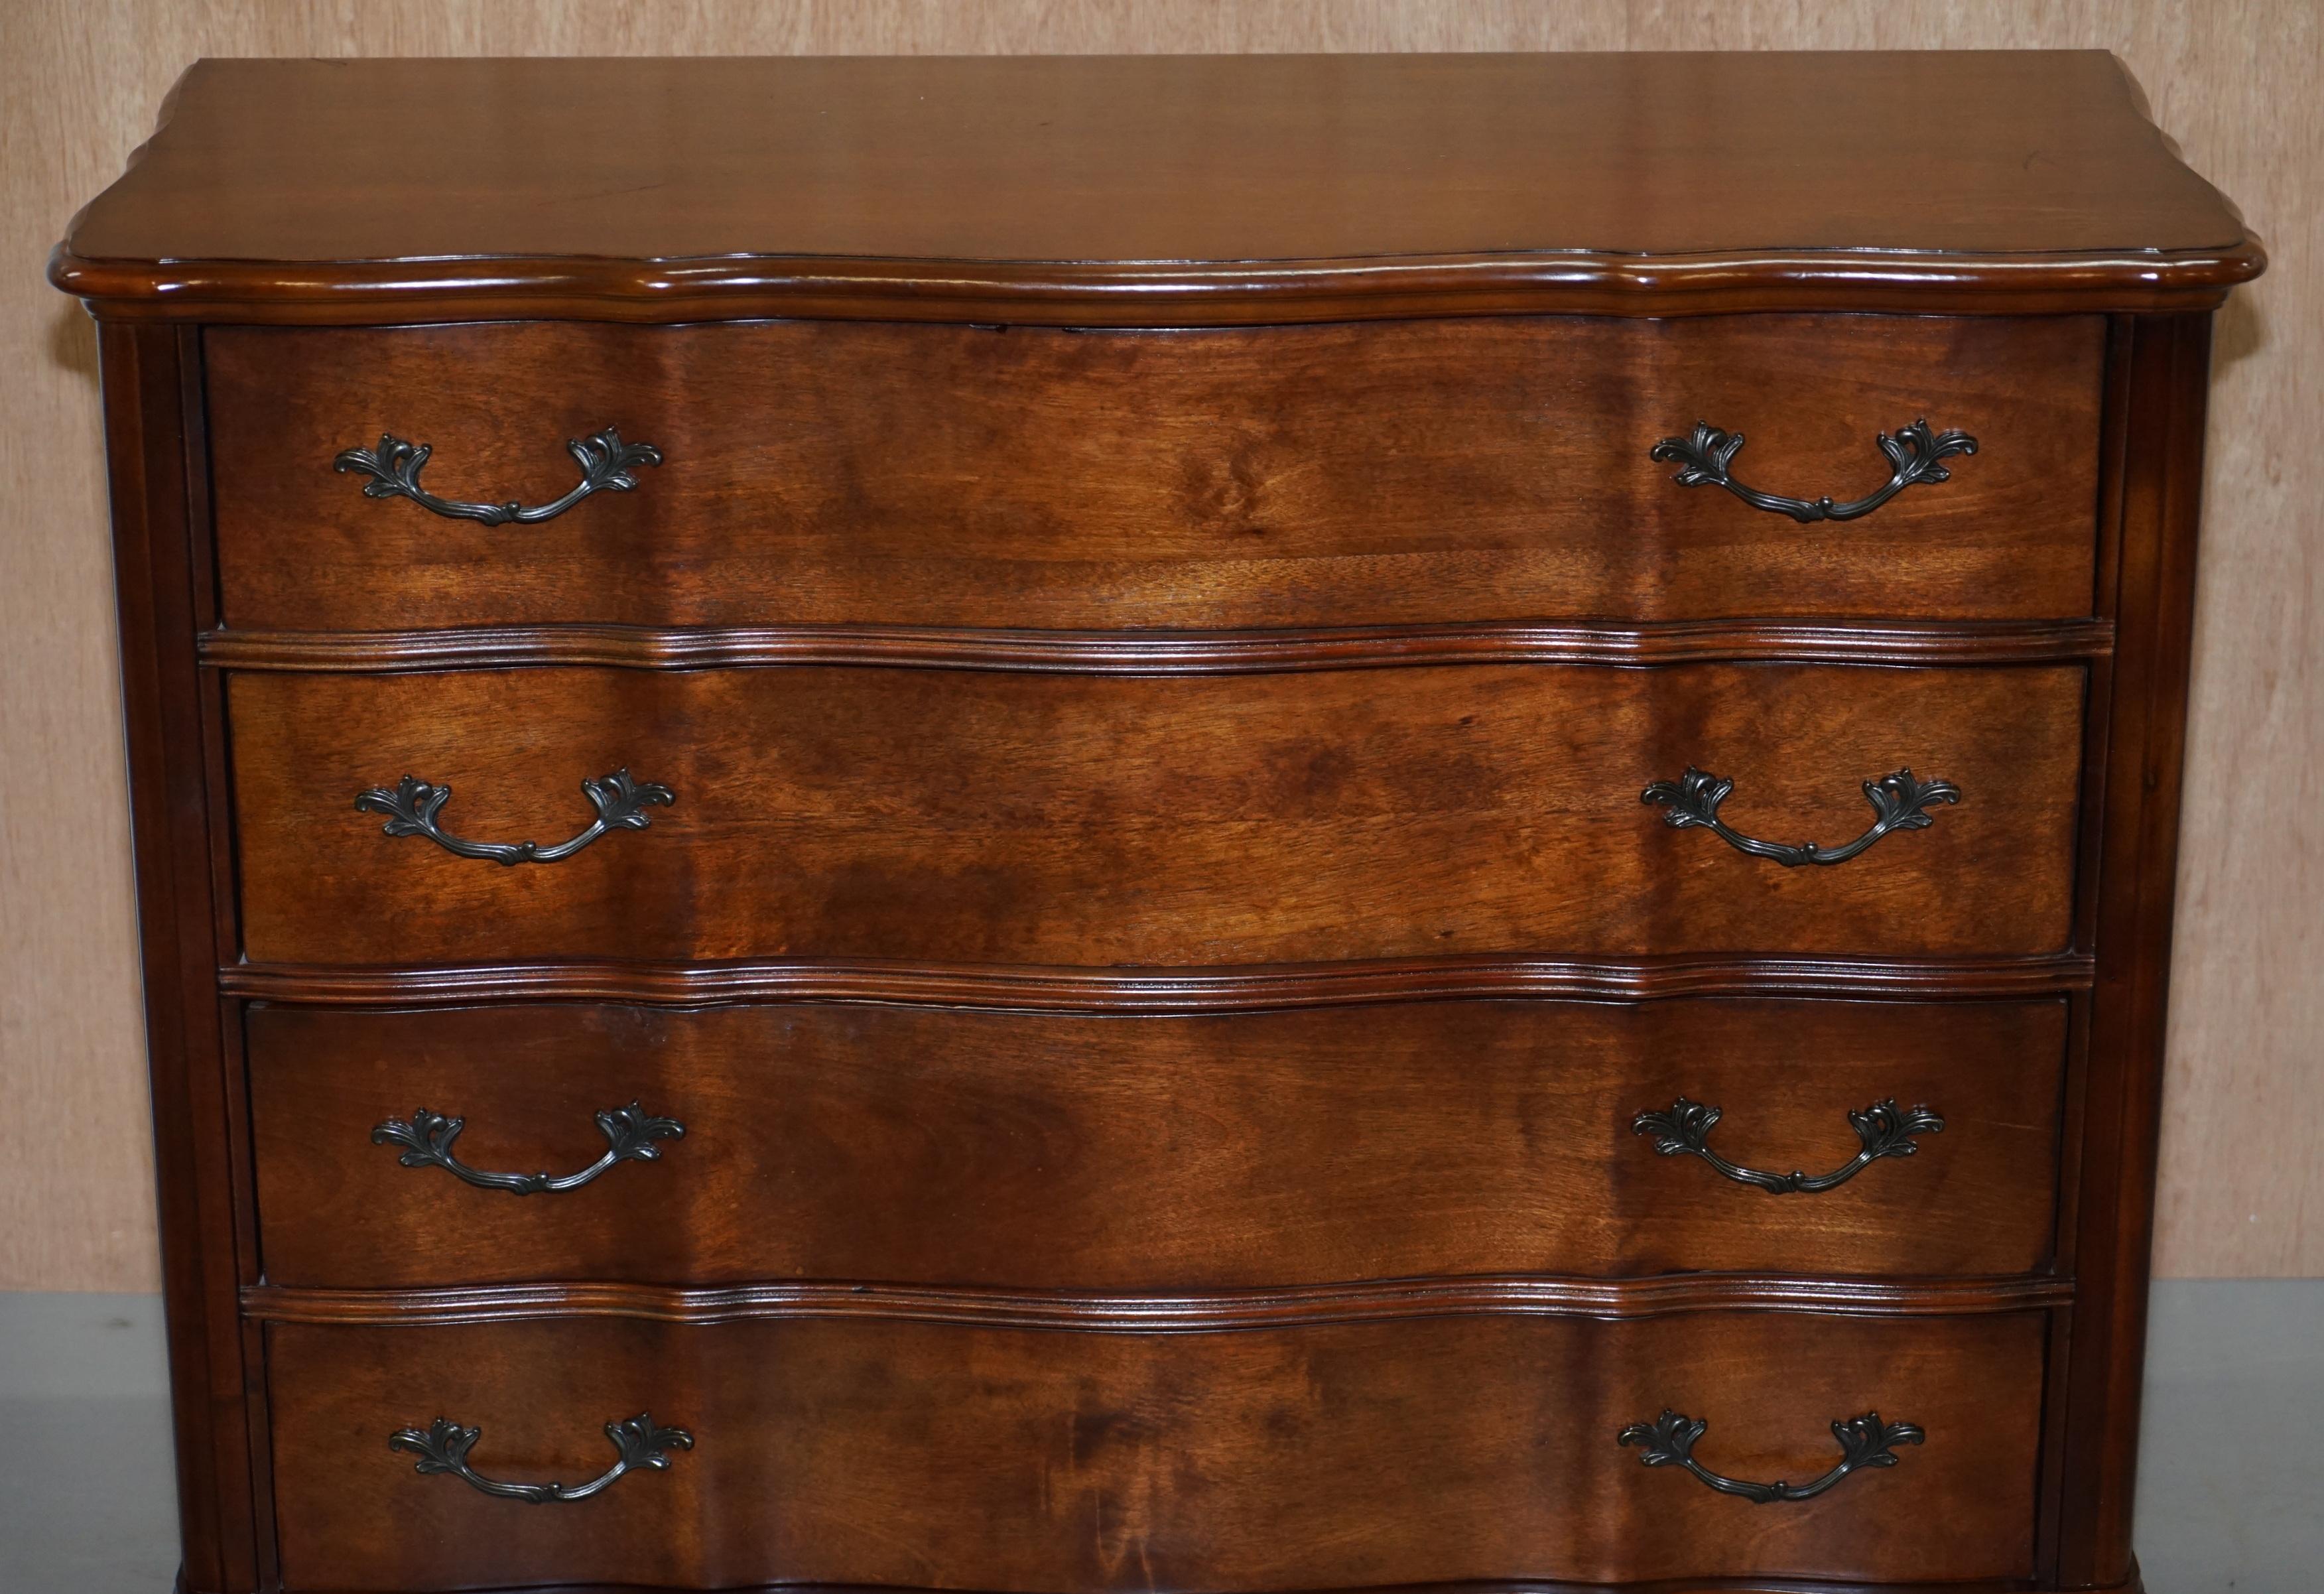 Hand-Crafted Larger Serpentine Fronted Ralph Lauren American Hardwood Chest of Drawers